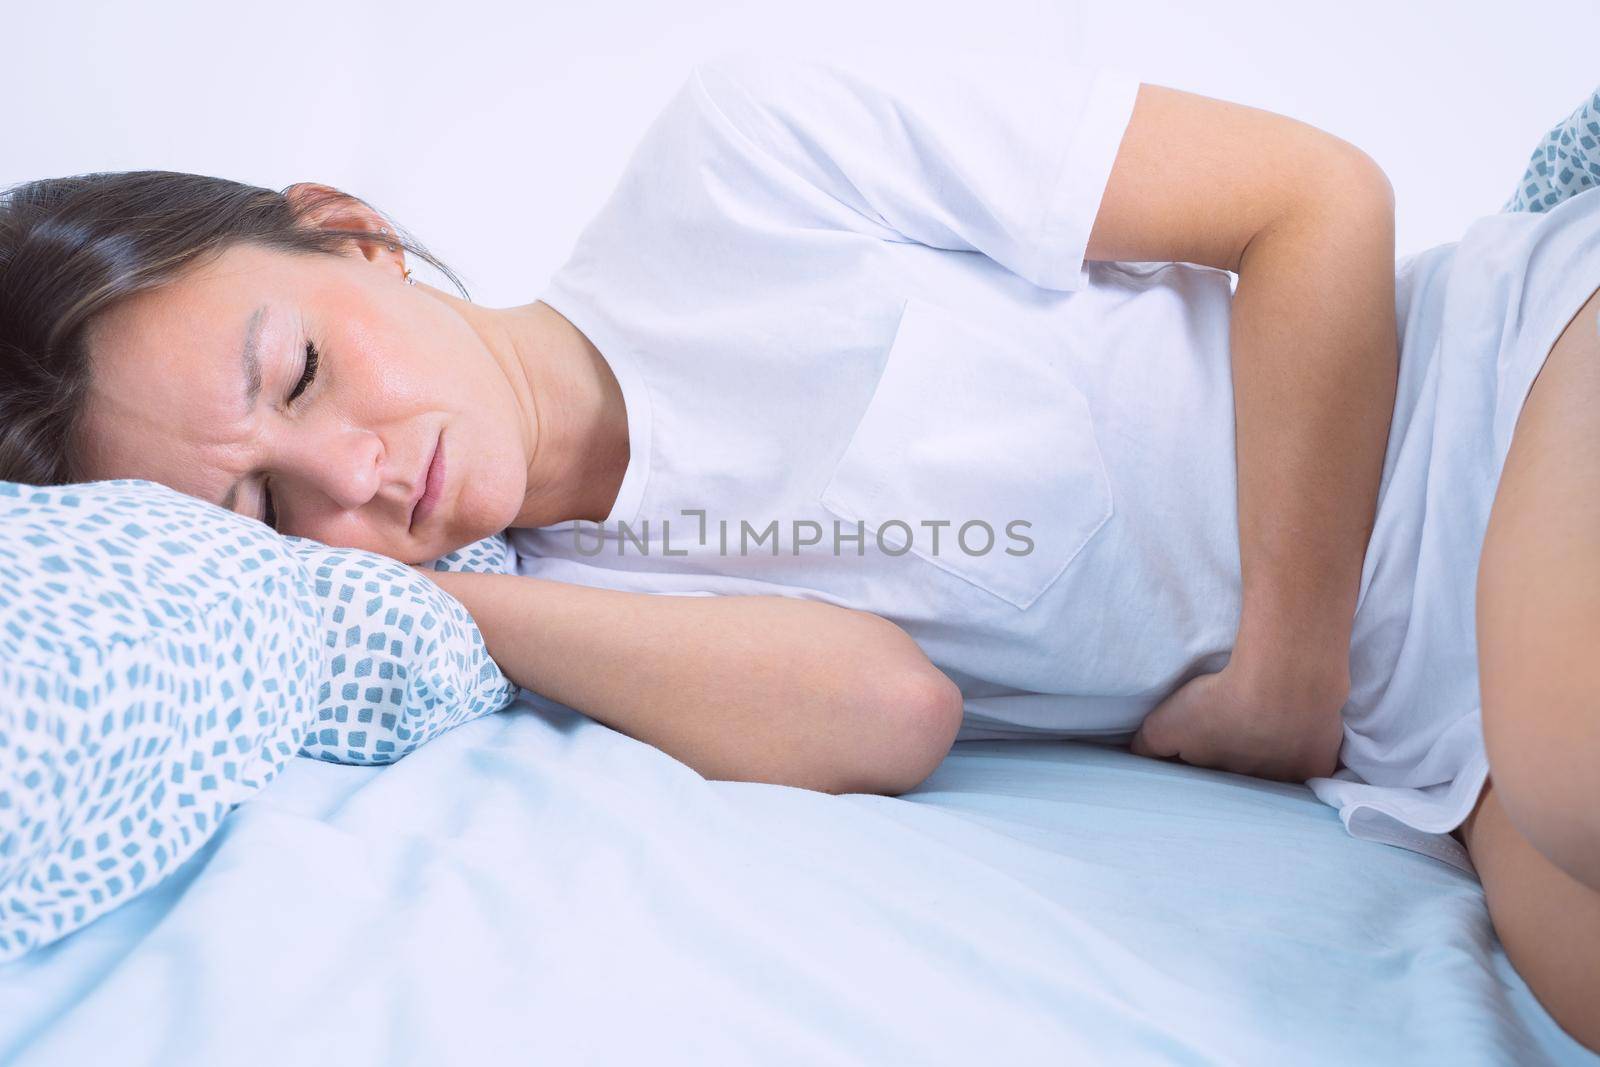 Young woman lying in the bed and suffering from gynecological problems, menstruation pain, stomach ache or abdominal pain. Menstruation period or PMS. High quality photo